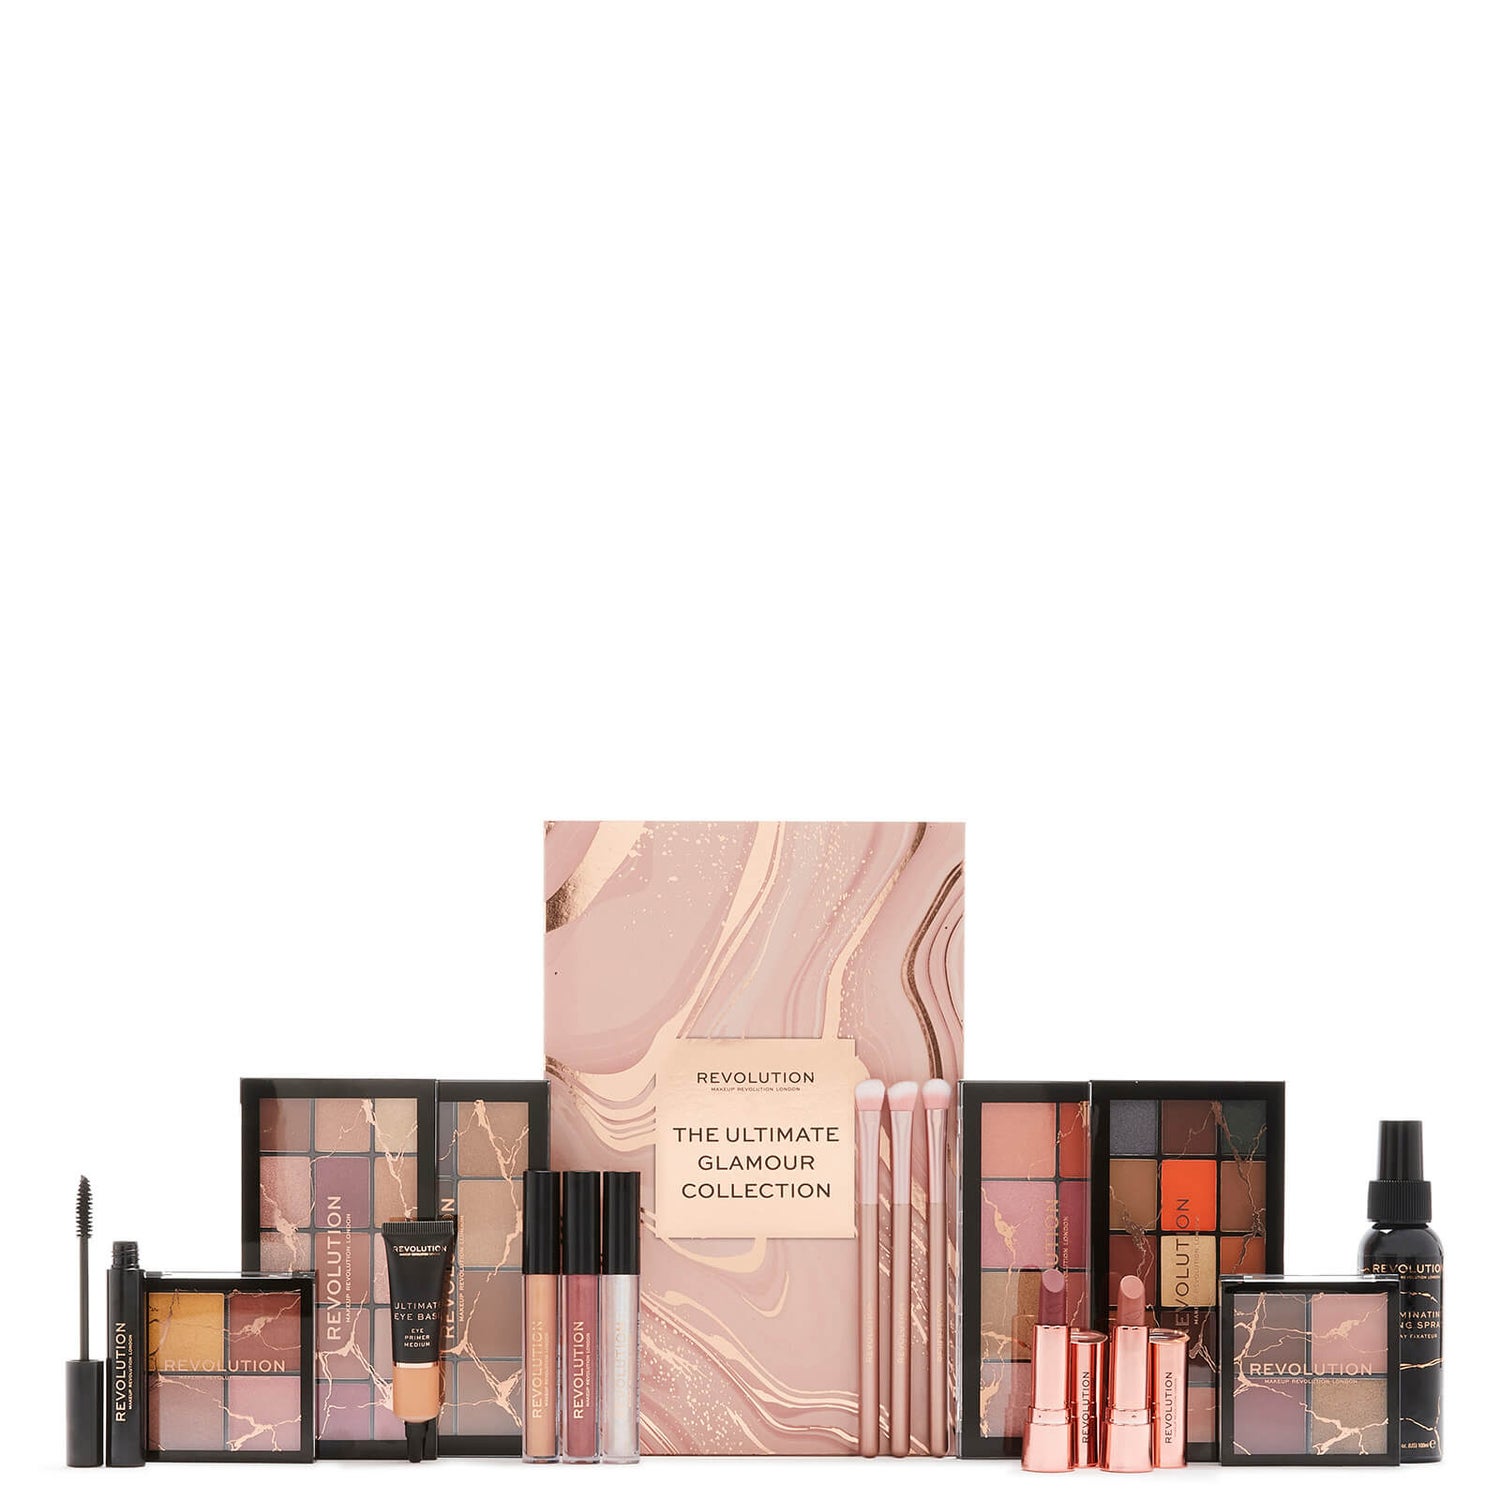 Revolution Ultimate Glamour Collection - 12 Days Of Christmas Advent Calendar